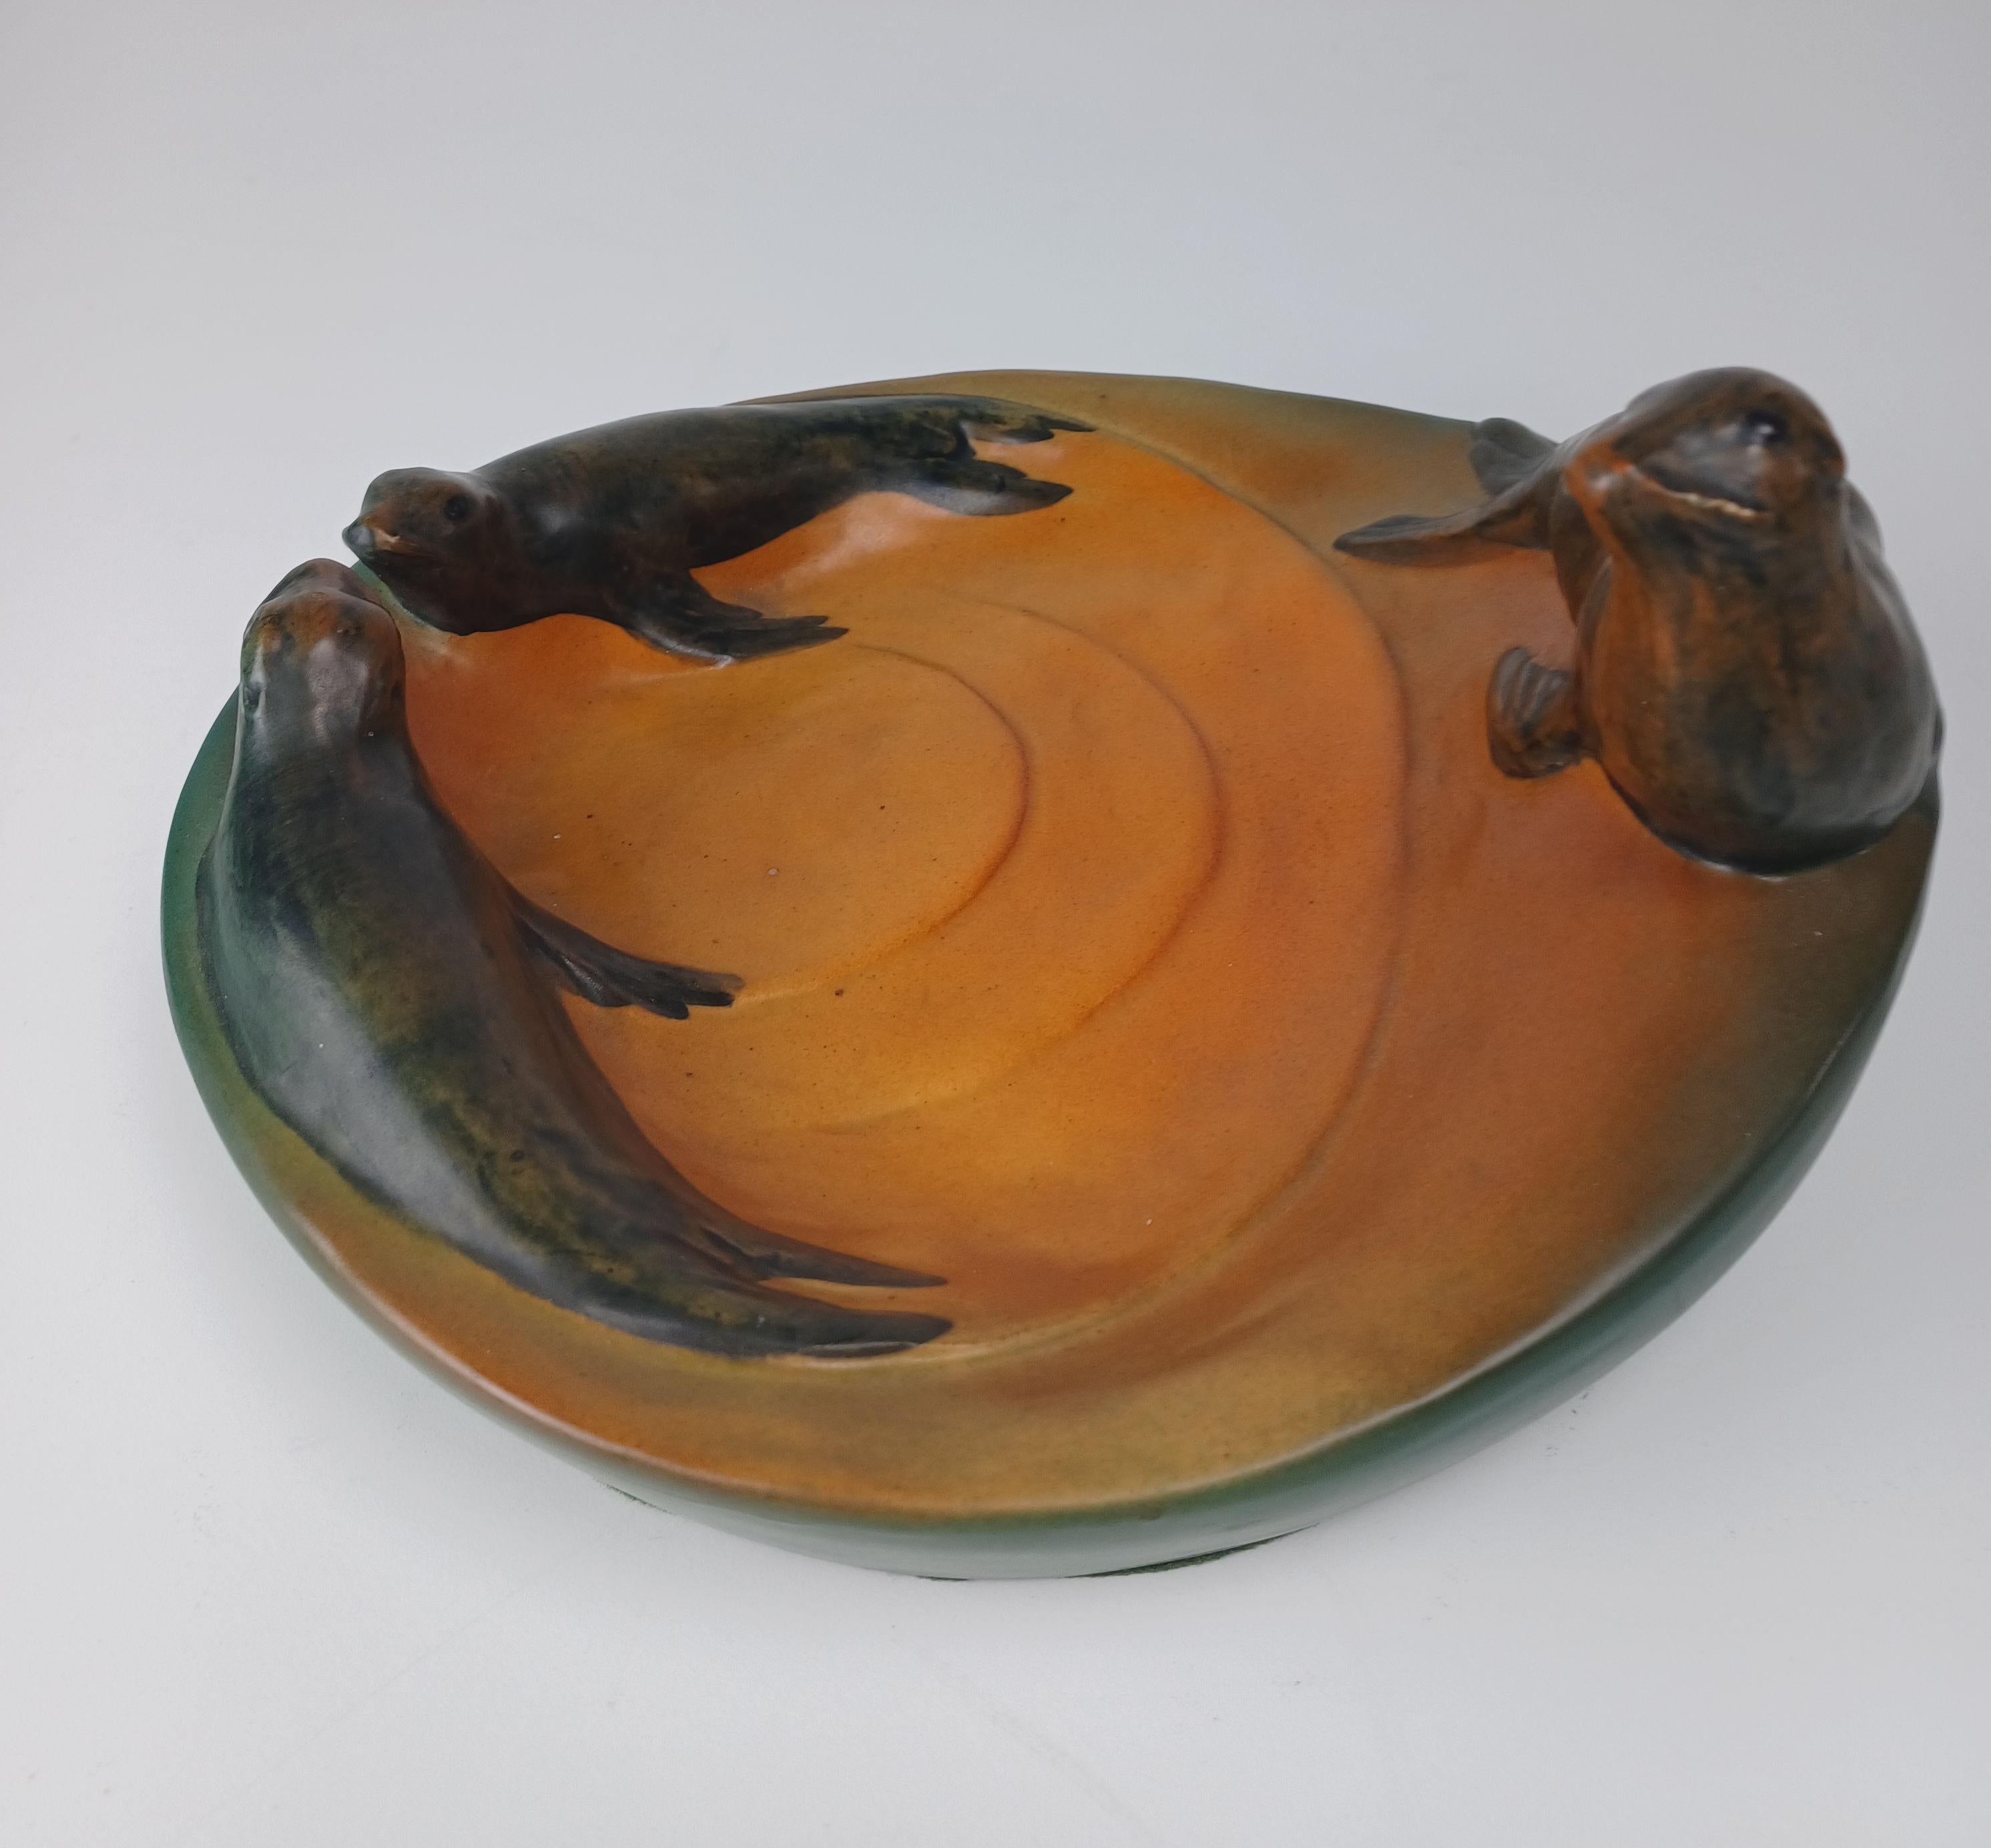 Early 20th Century 1910's Danish Art Nouveau Handcrafted Sealion Bowl - Ash Tray by P. Ipsens Enke